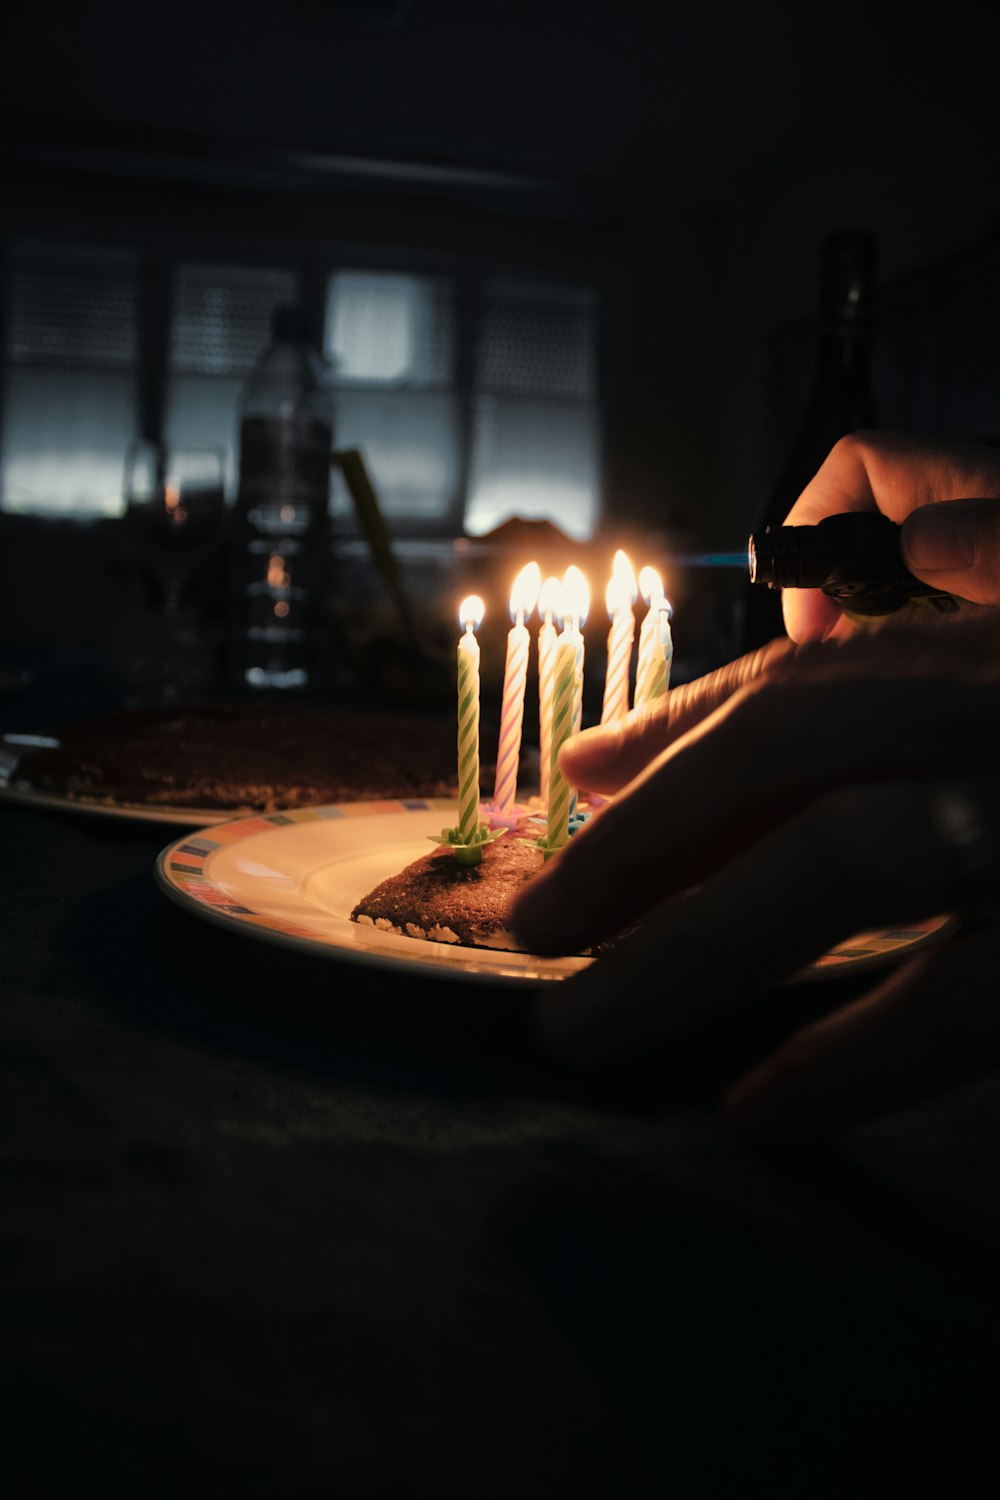 person holding lighted candles on white ceramic round plate